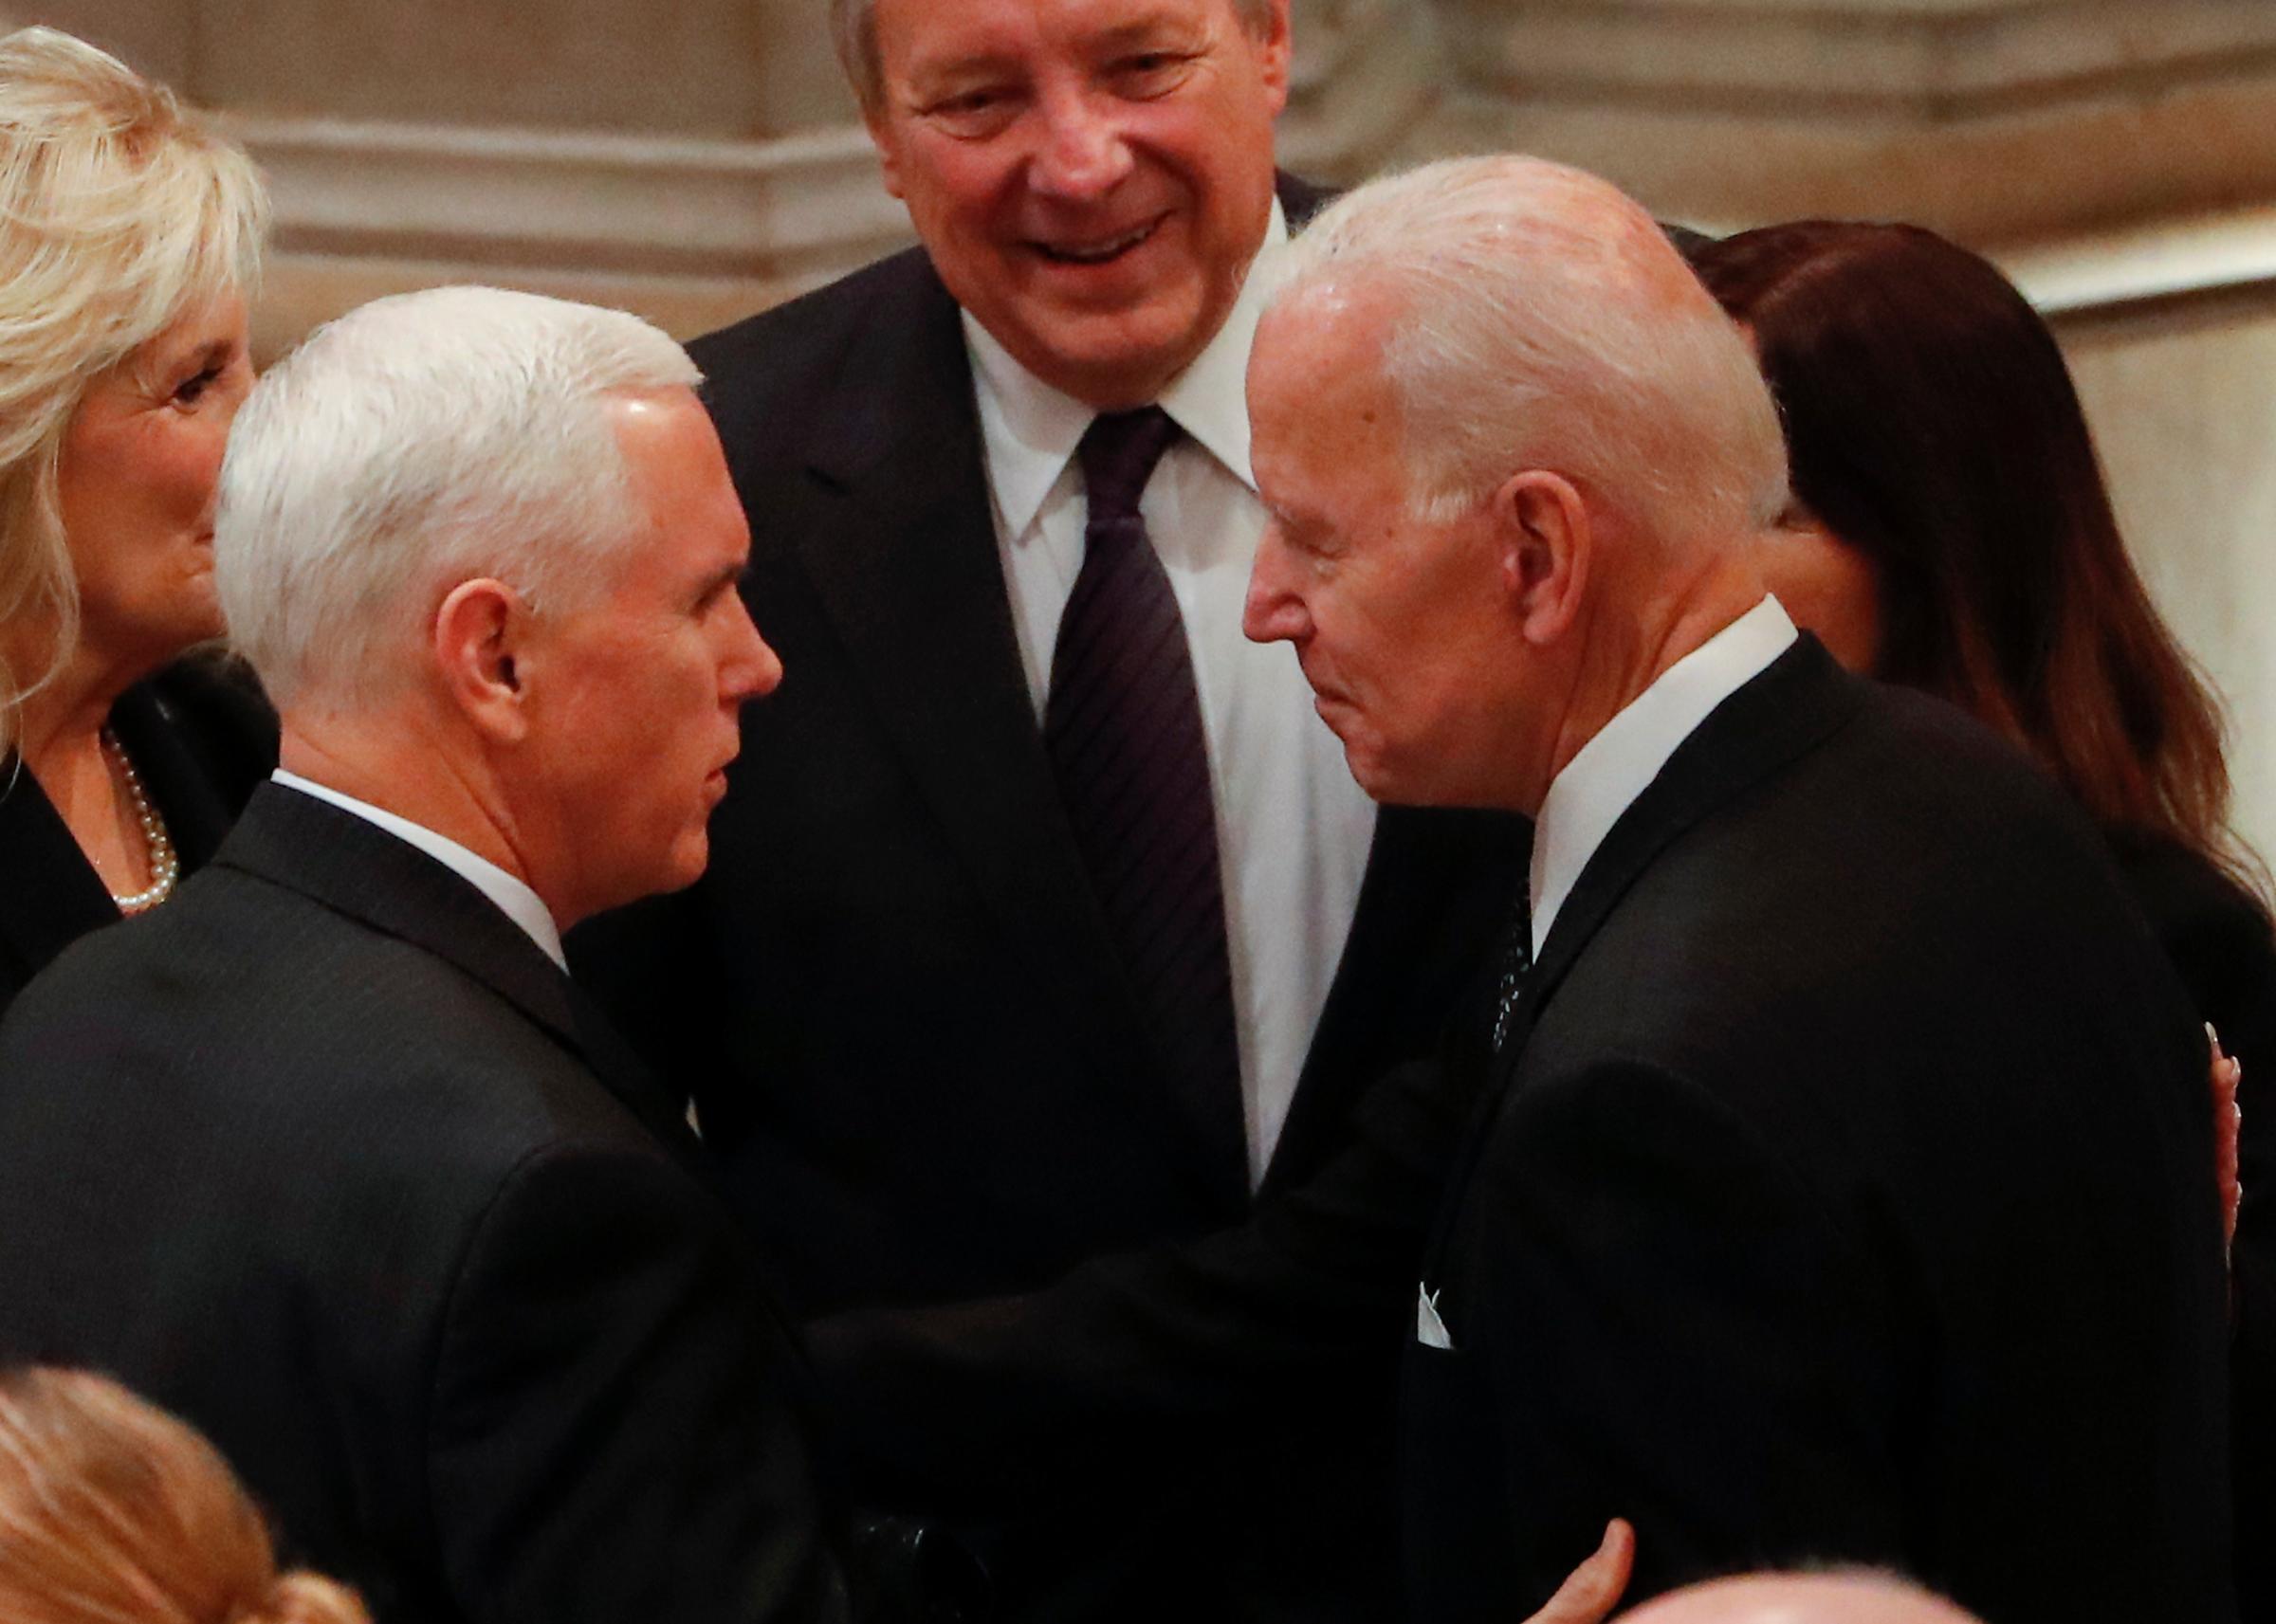 United States Vice President Mike Pence greets Former United States Vice President Joe Biden as they arrive for the funeral services for former United States President George H. W. Bush at the National Cathedral